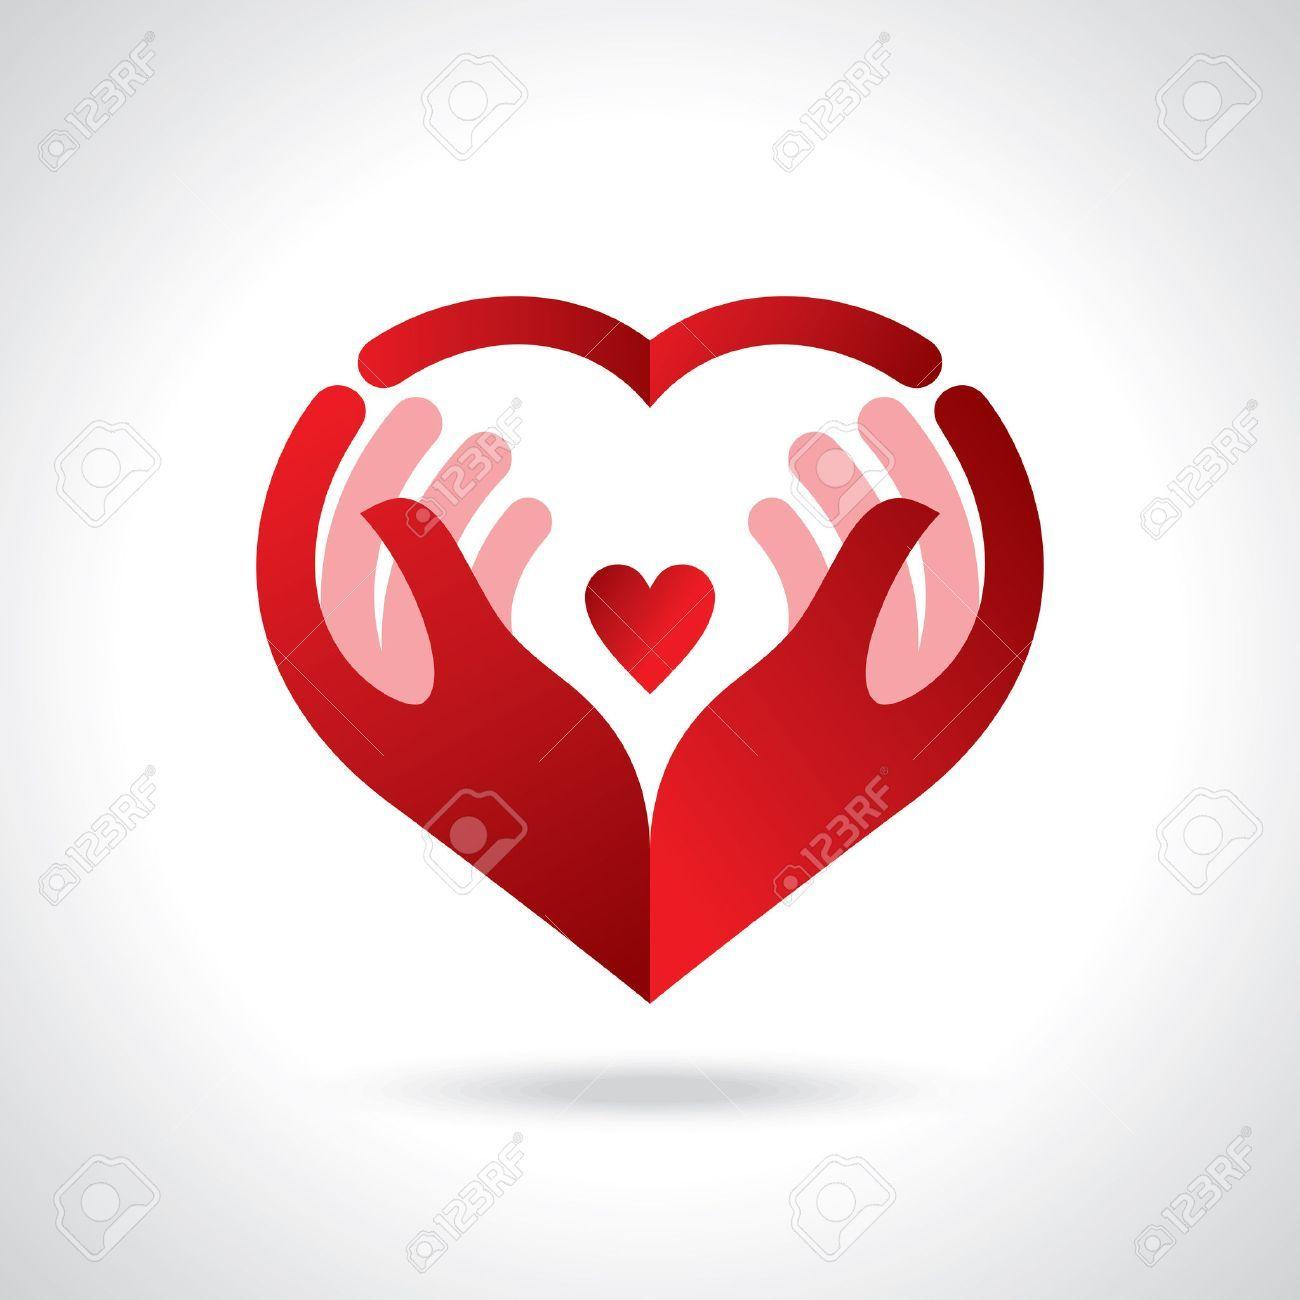 Red Heart Hands Logo - Free Heart Hand Icon 300297. Download Heart Hand Icon